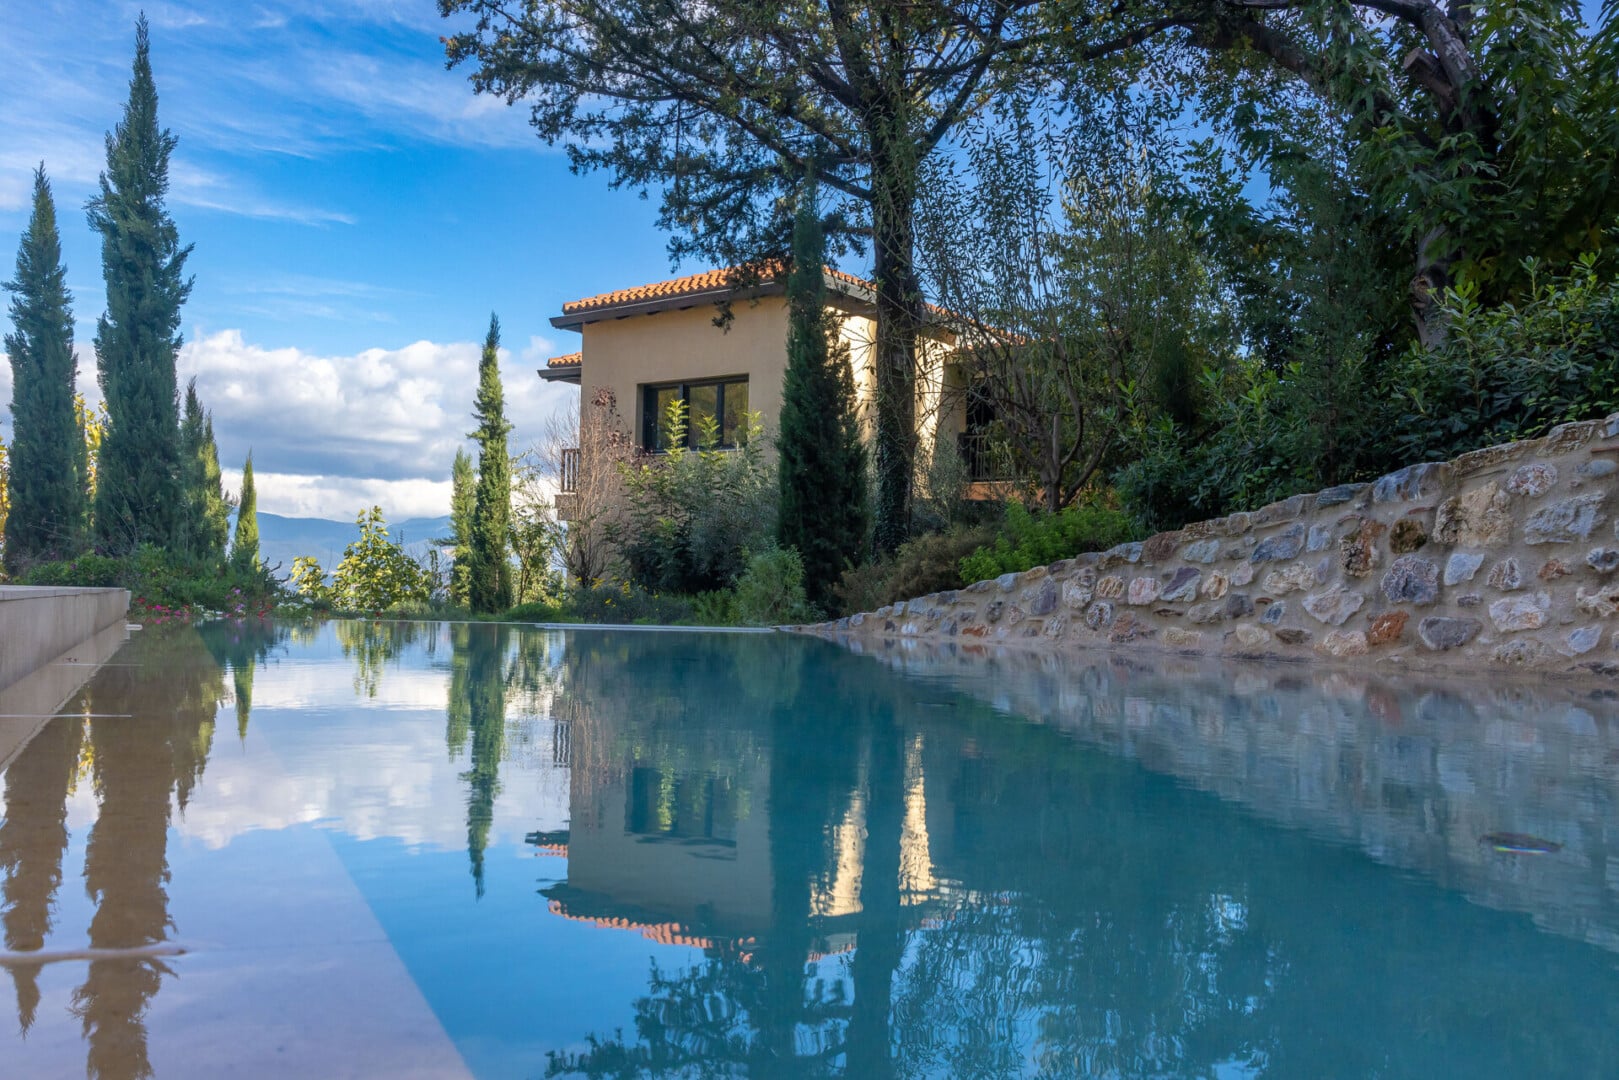 Image taken from the surface level of the rectangular pool at Euphoria Retreat showing the reflections of the sky, building and trees in the still waters.